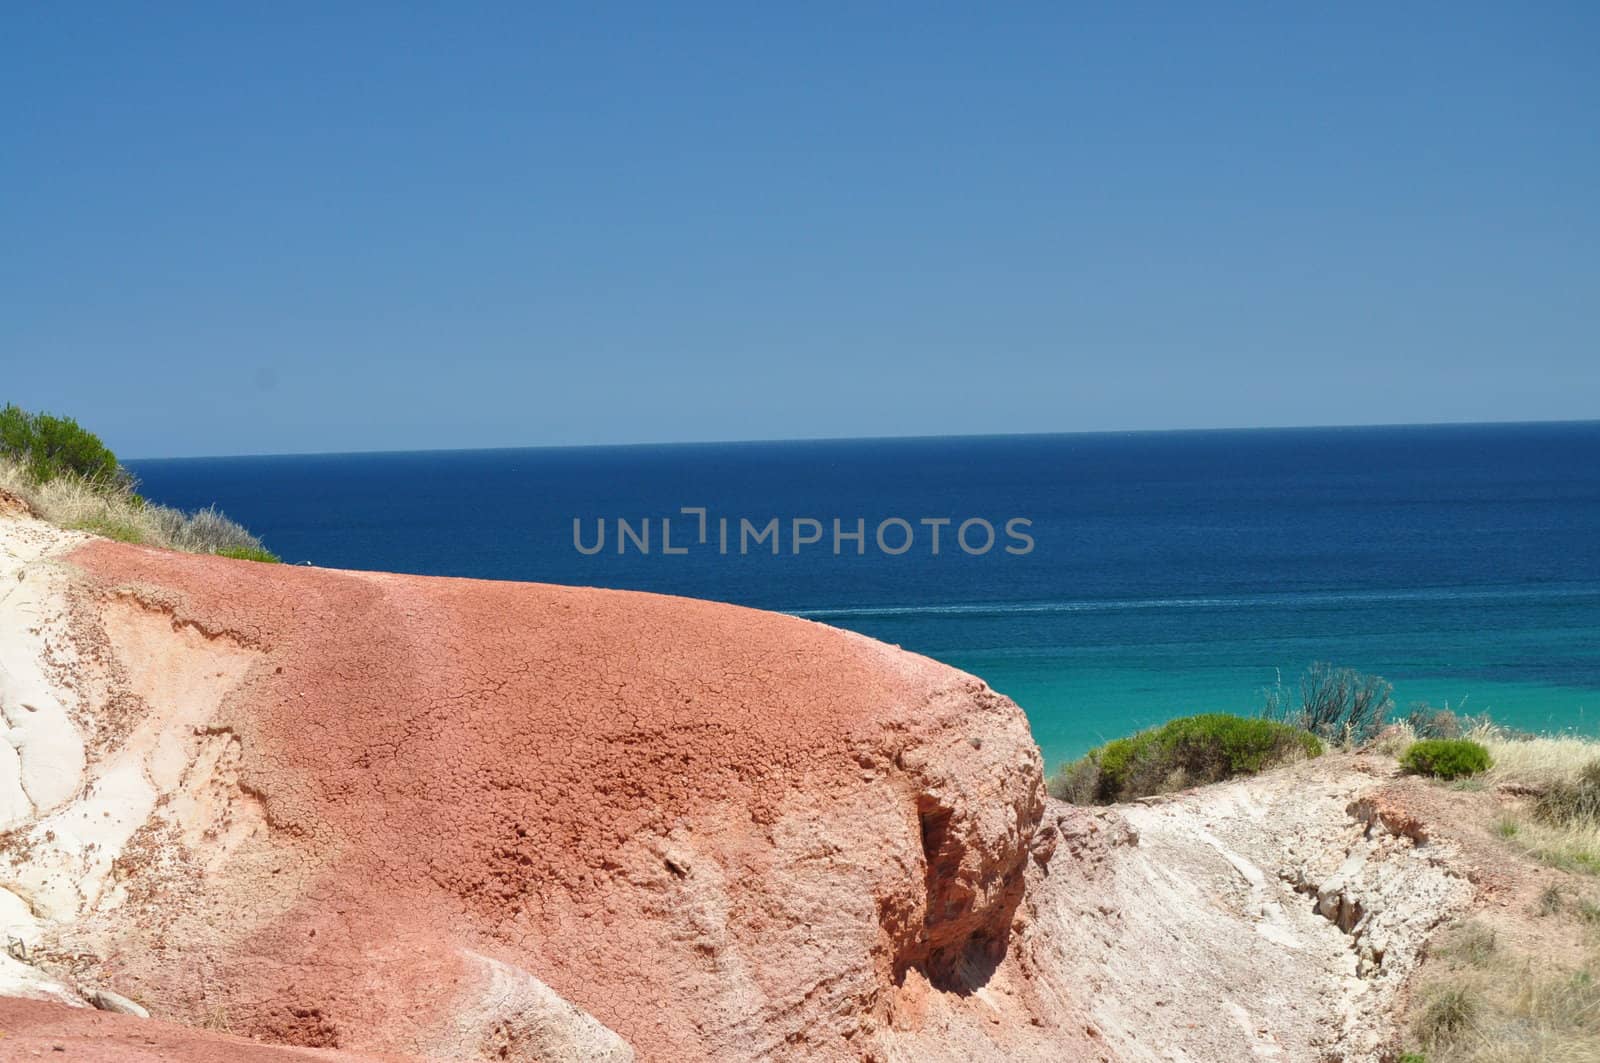 Beautiful azure, blue water beach with red stone. Hallett Cove Conservation Park, South Australia. by dimkadimon